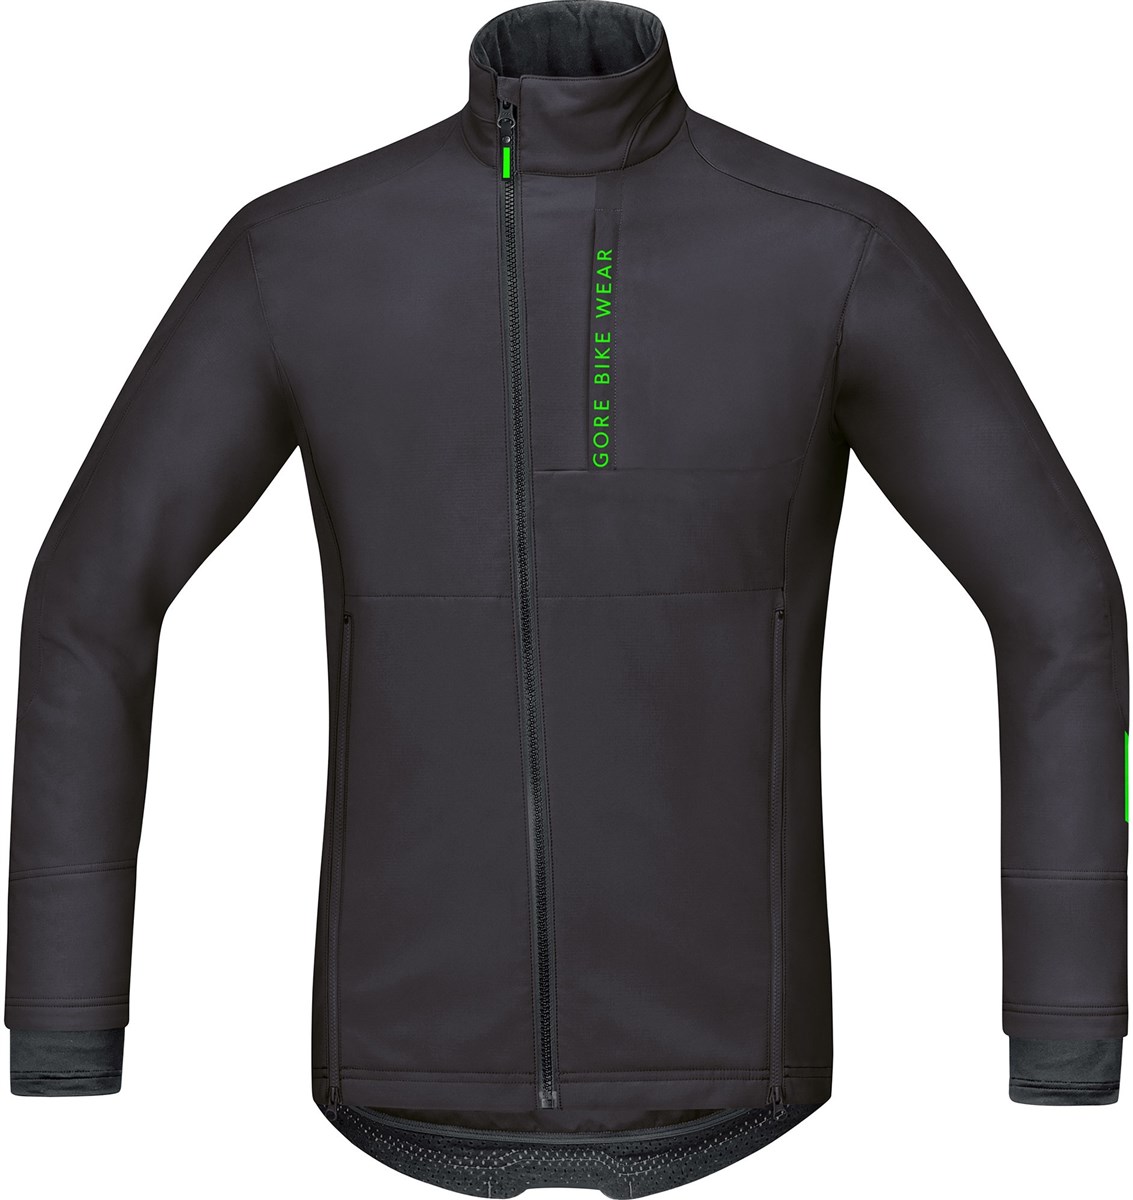 Gore Power Trail Windstopper Soft Shell Jacket AW17 product image